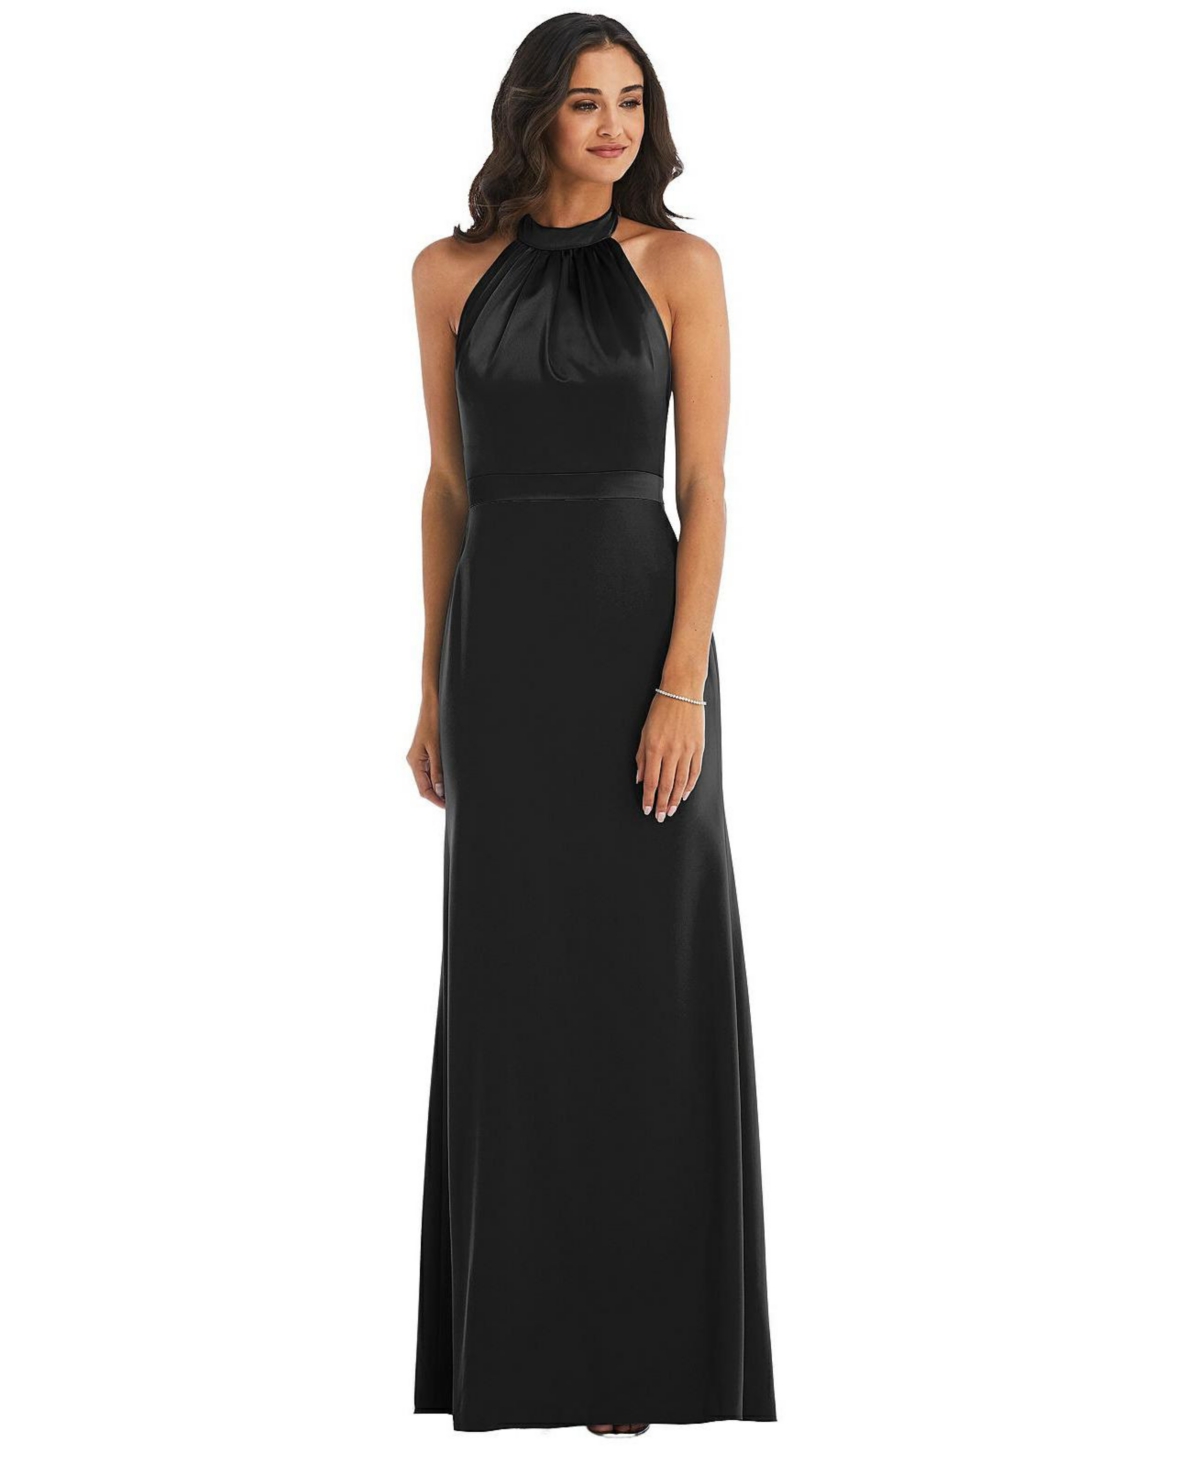 Womens High-Neck Open-Back Maxi Dress with Scarf Tie - Black